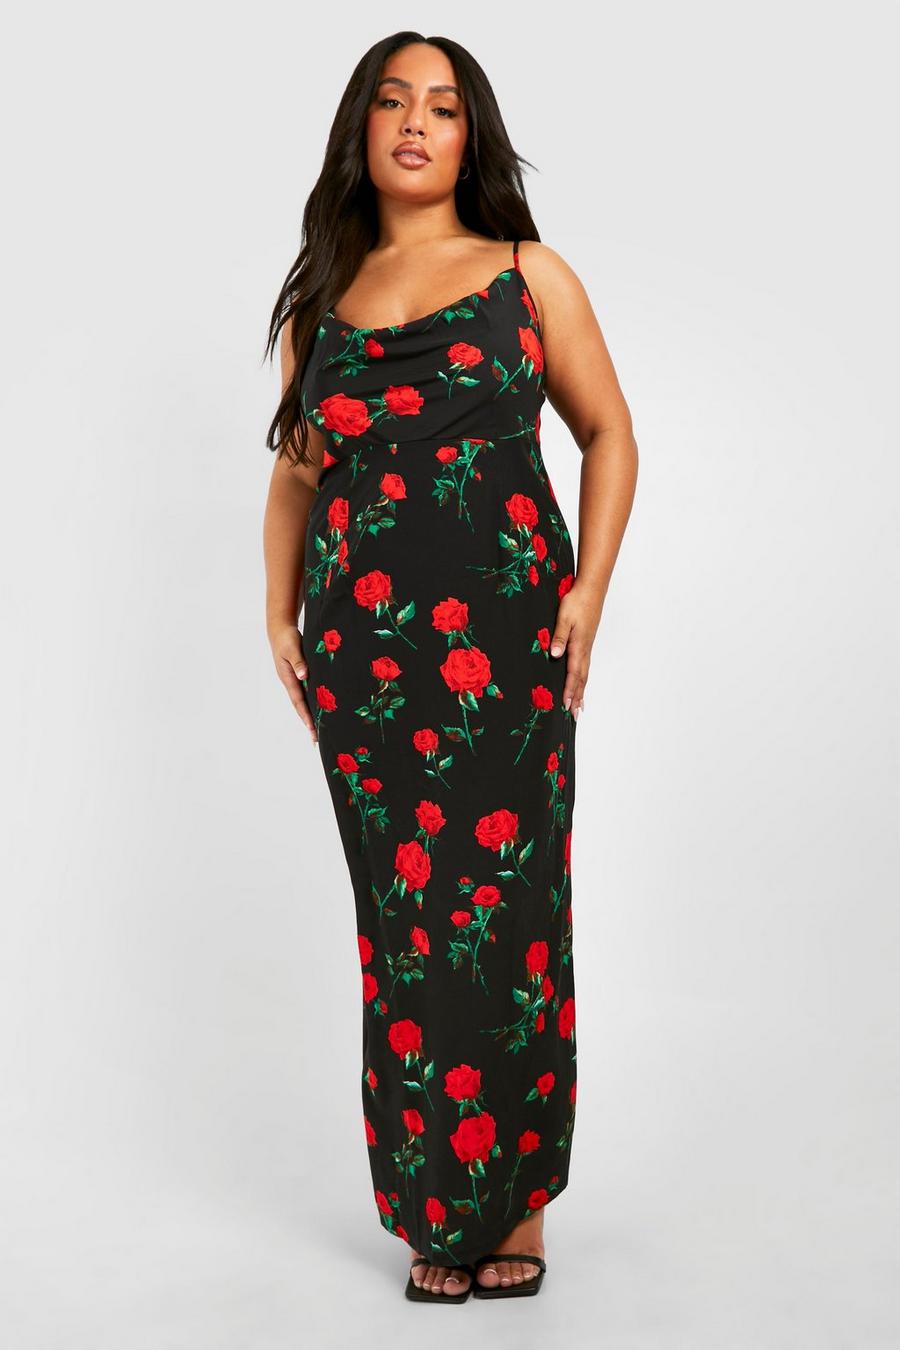 Grande taille - Robe nuisette fleurie, Black image number 1